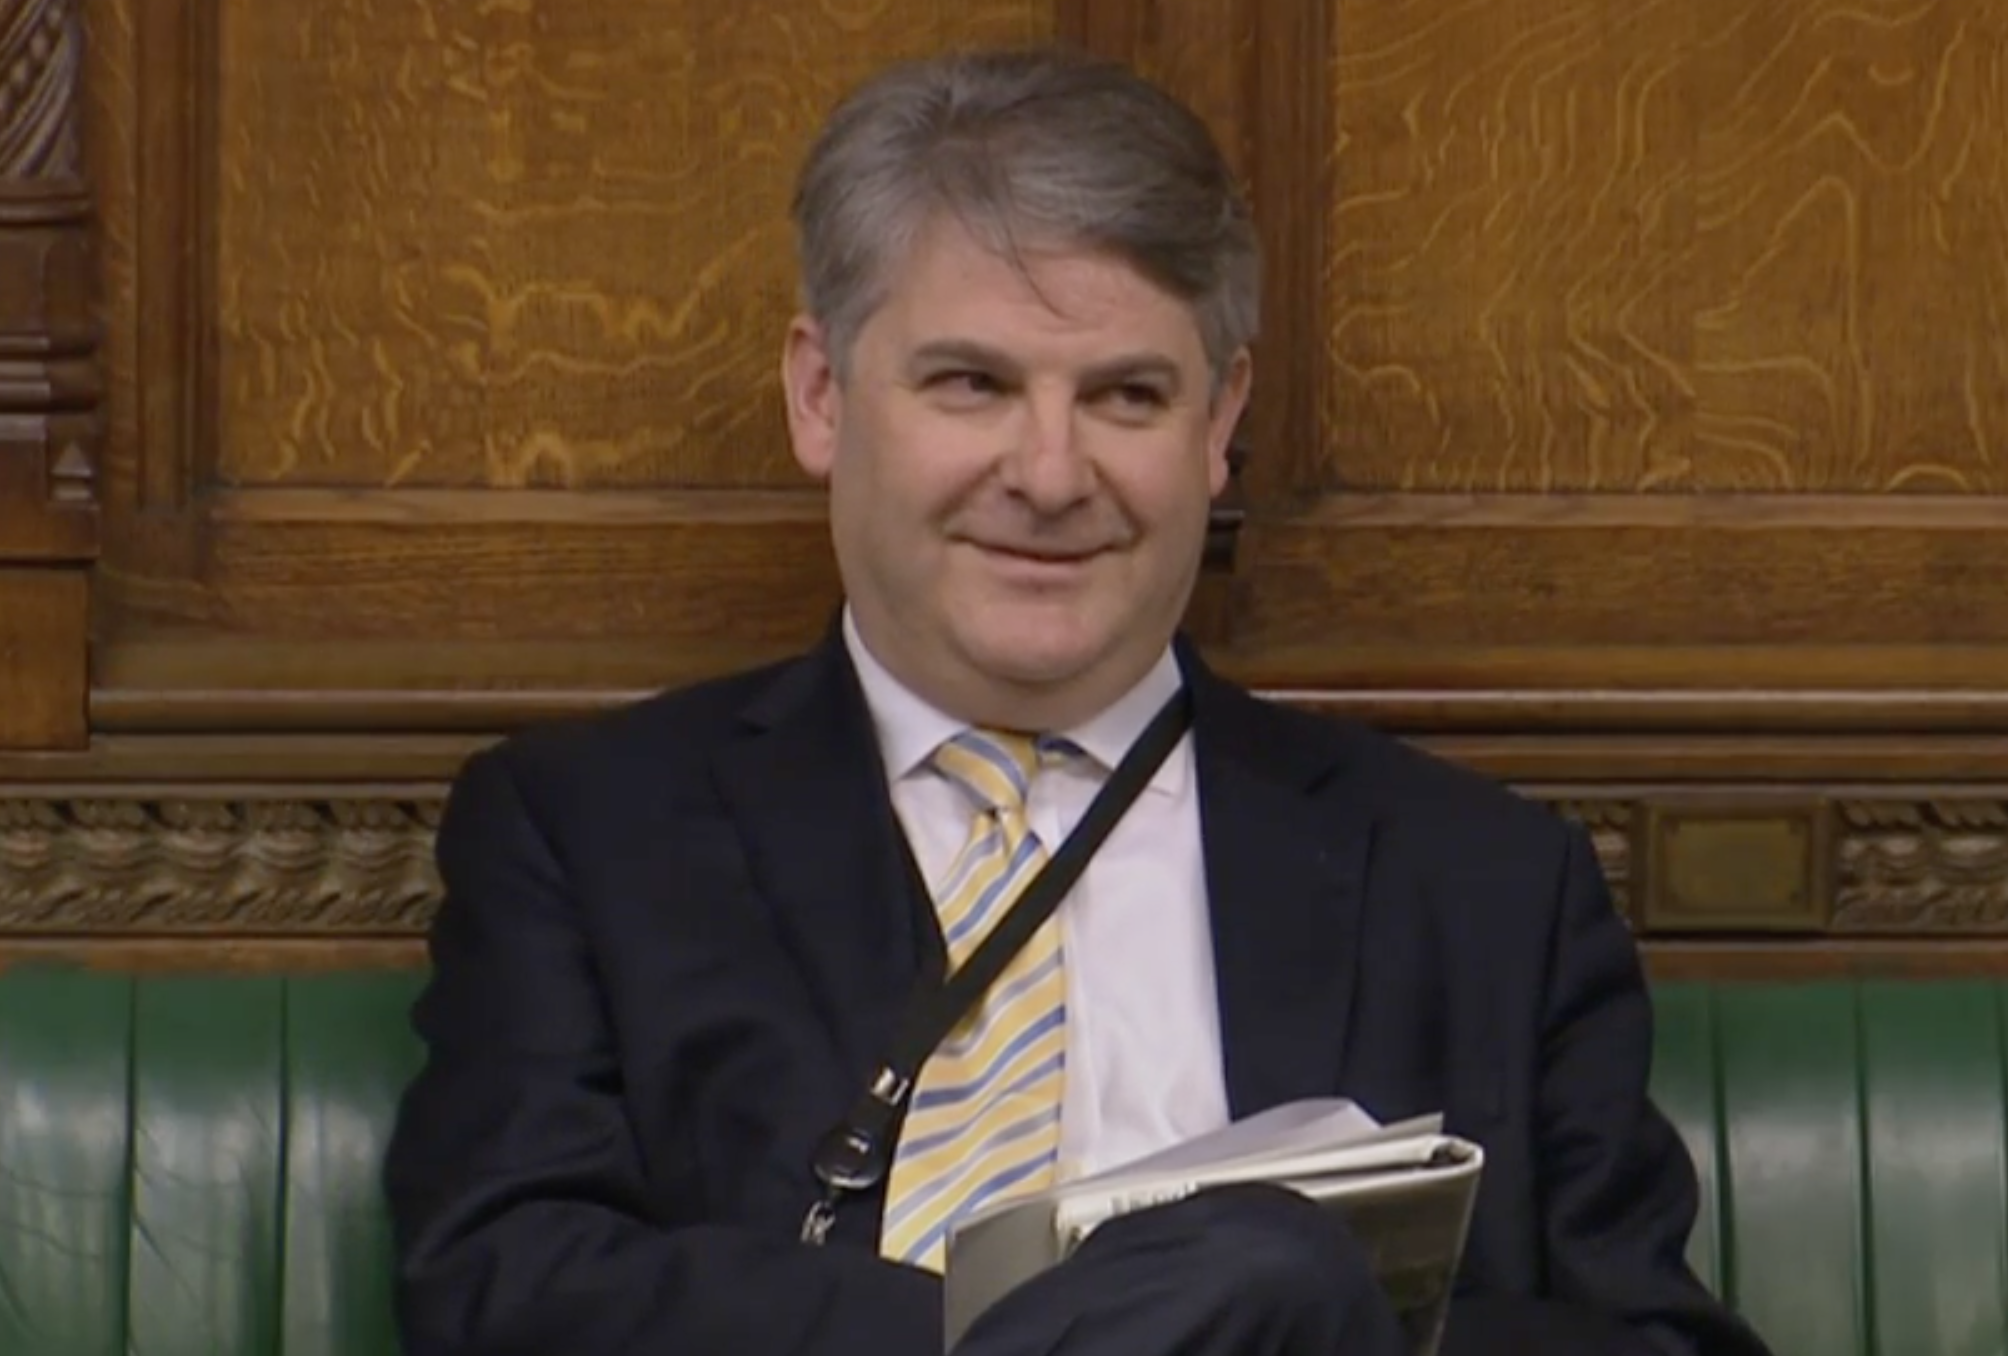 Philip Davies believes the Combating Violence Against Women Bill is "sexist"